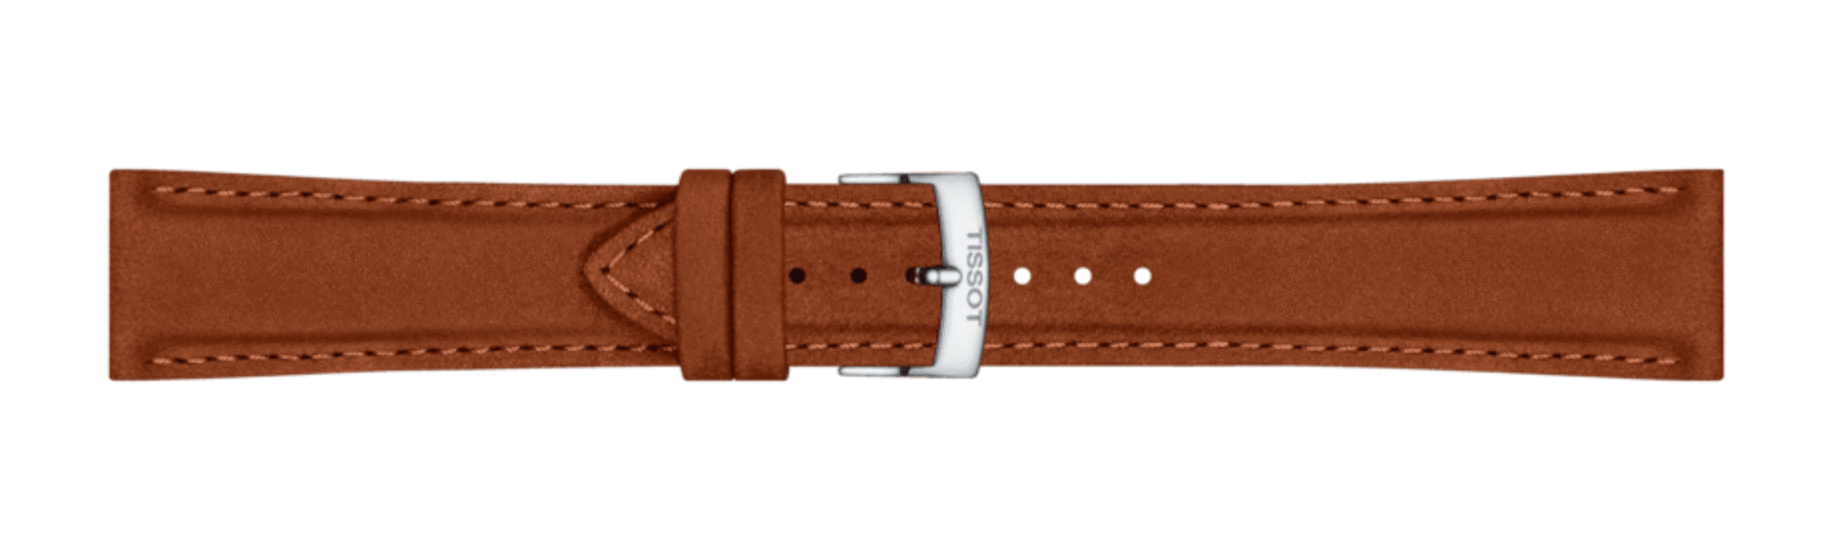 TISSOT OFFICIAL CAMEL LEATHER STRAP LUGS 21 MM T852.048.229